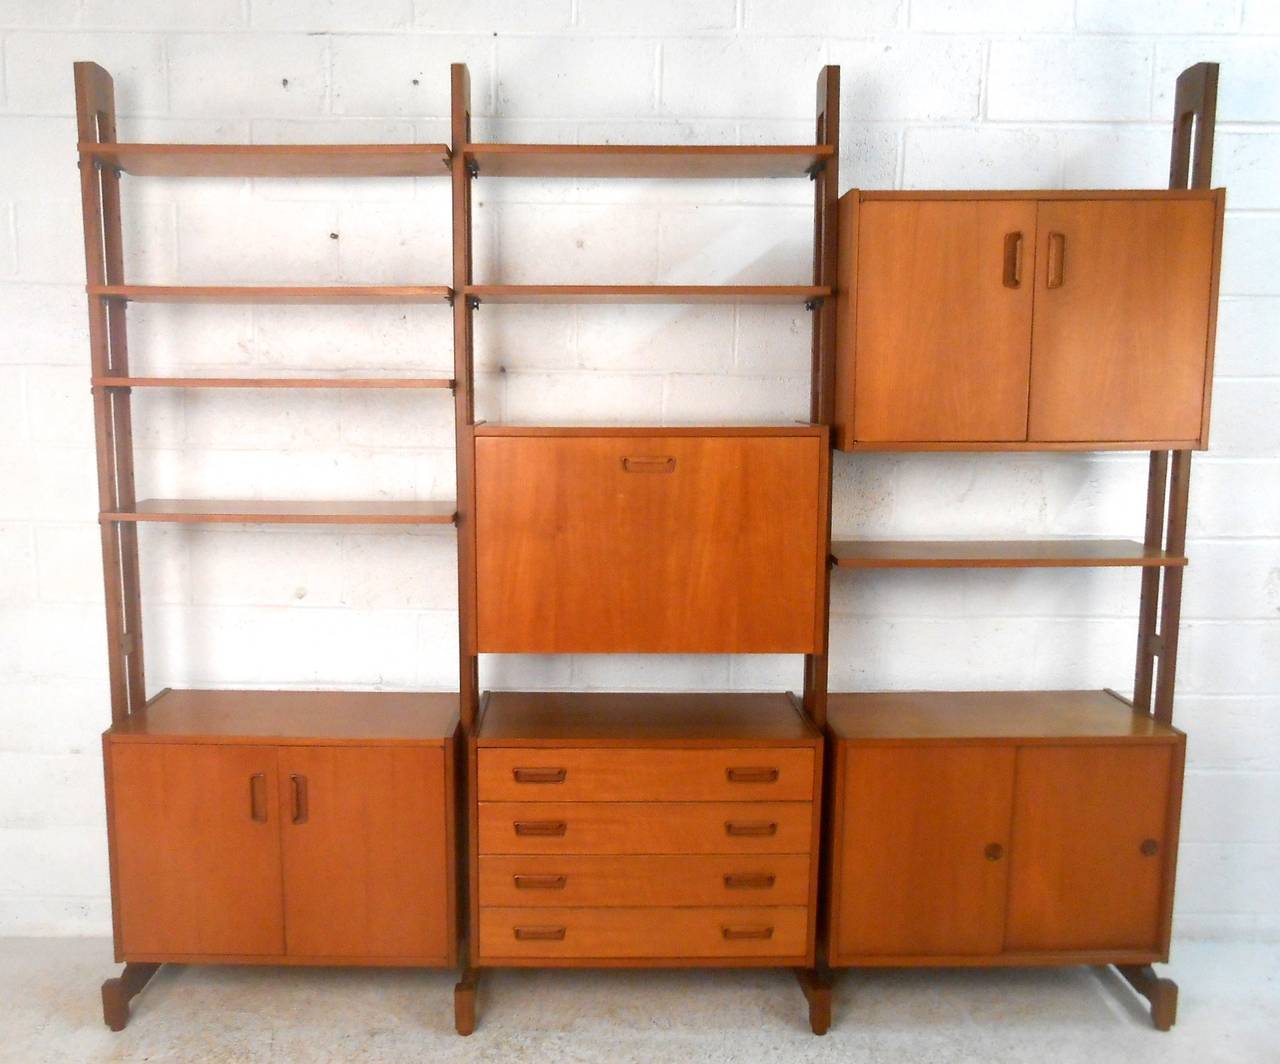 This beautiful Mid-Century teak unit features unique sculpted pulls, feet and frames. Freestanding design and finished back make this suitable for use against a wall or as room divider. Drop-leaf center cabinet compliments traditional drawers and